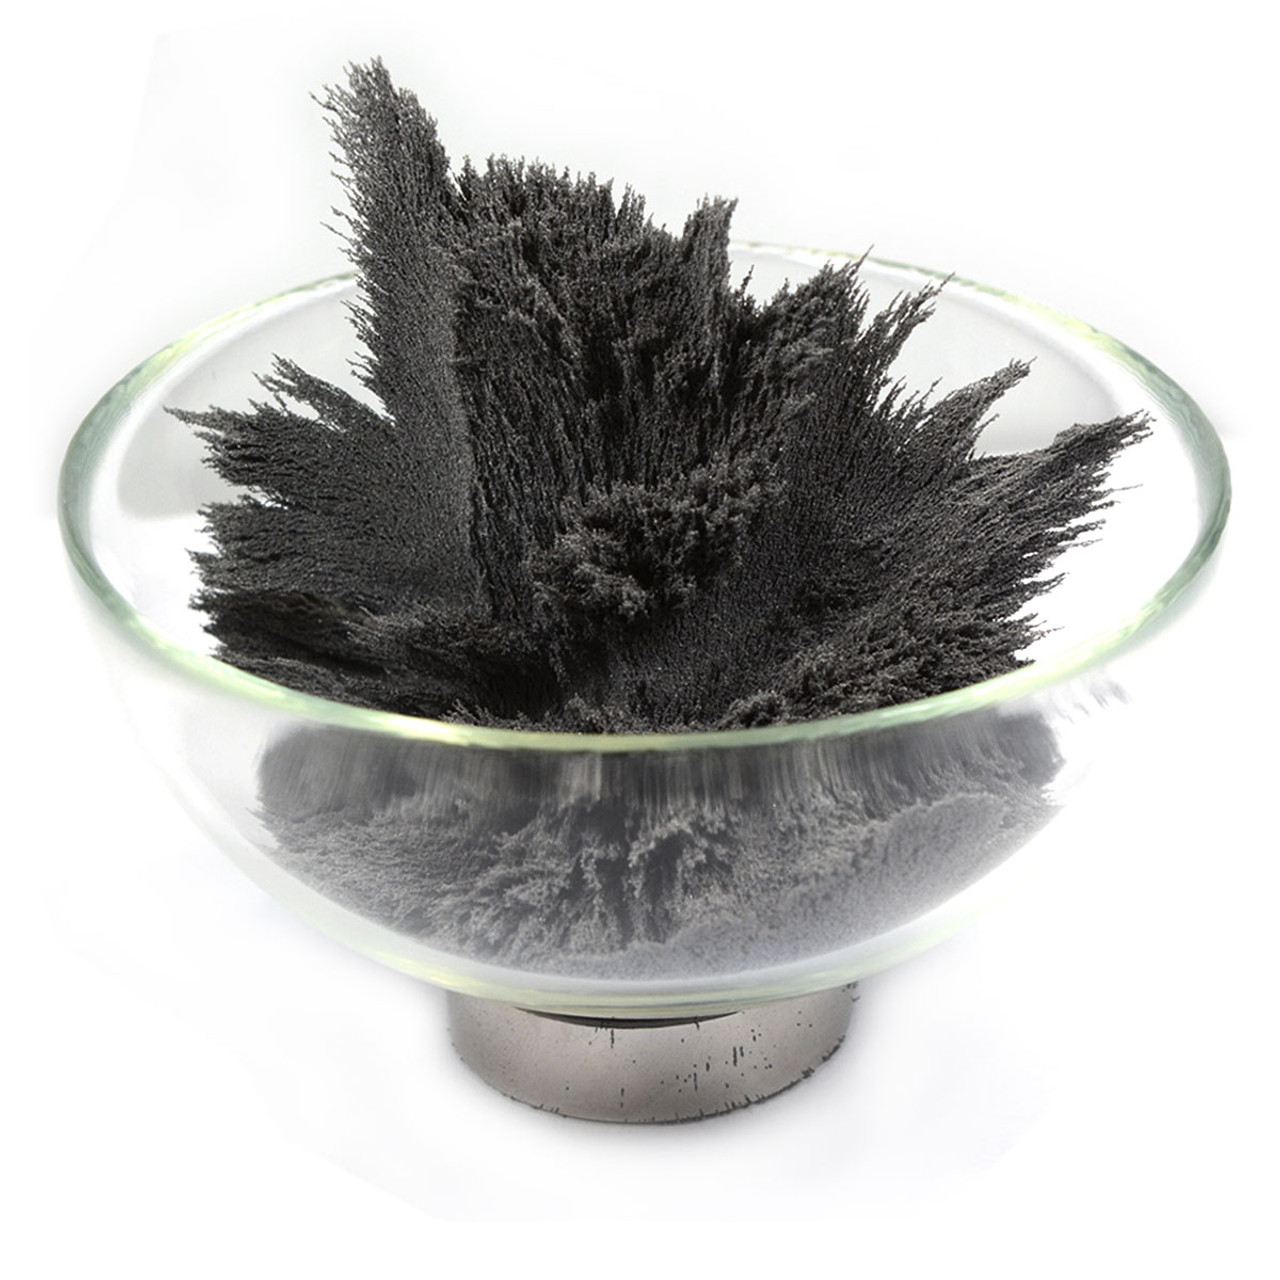 Iron Powder for Educational Magnetism Studies & Demonstrations